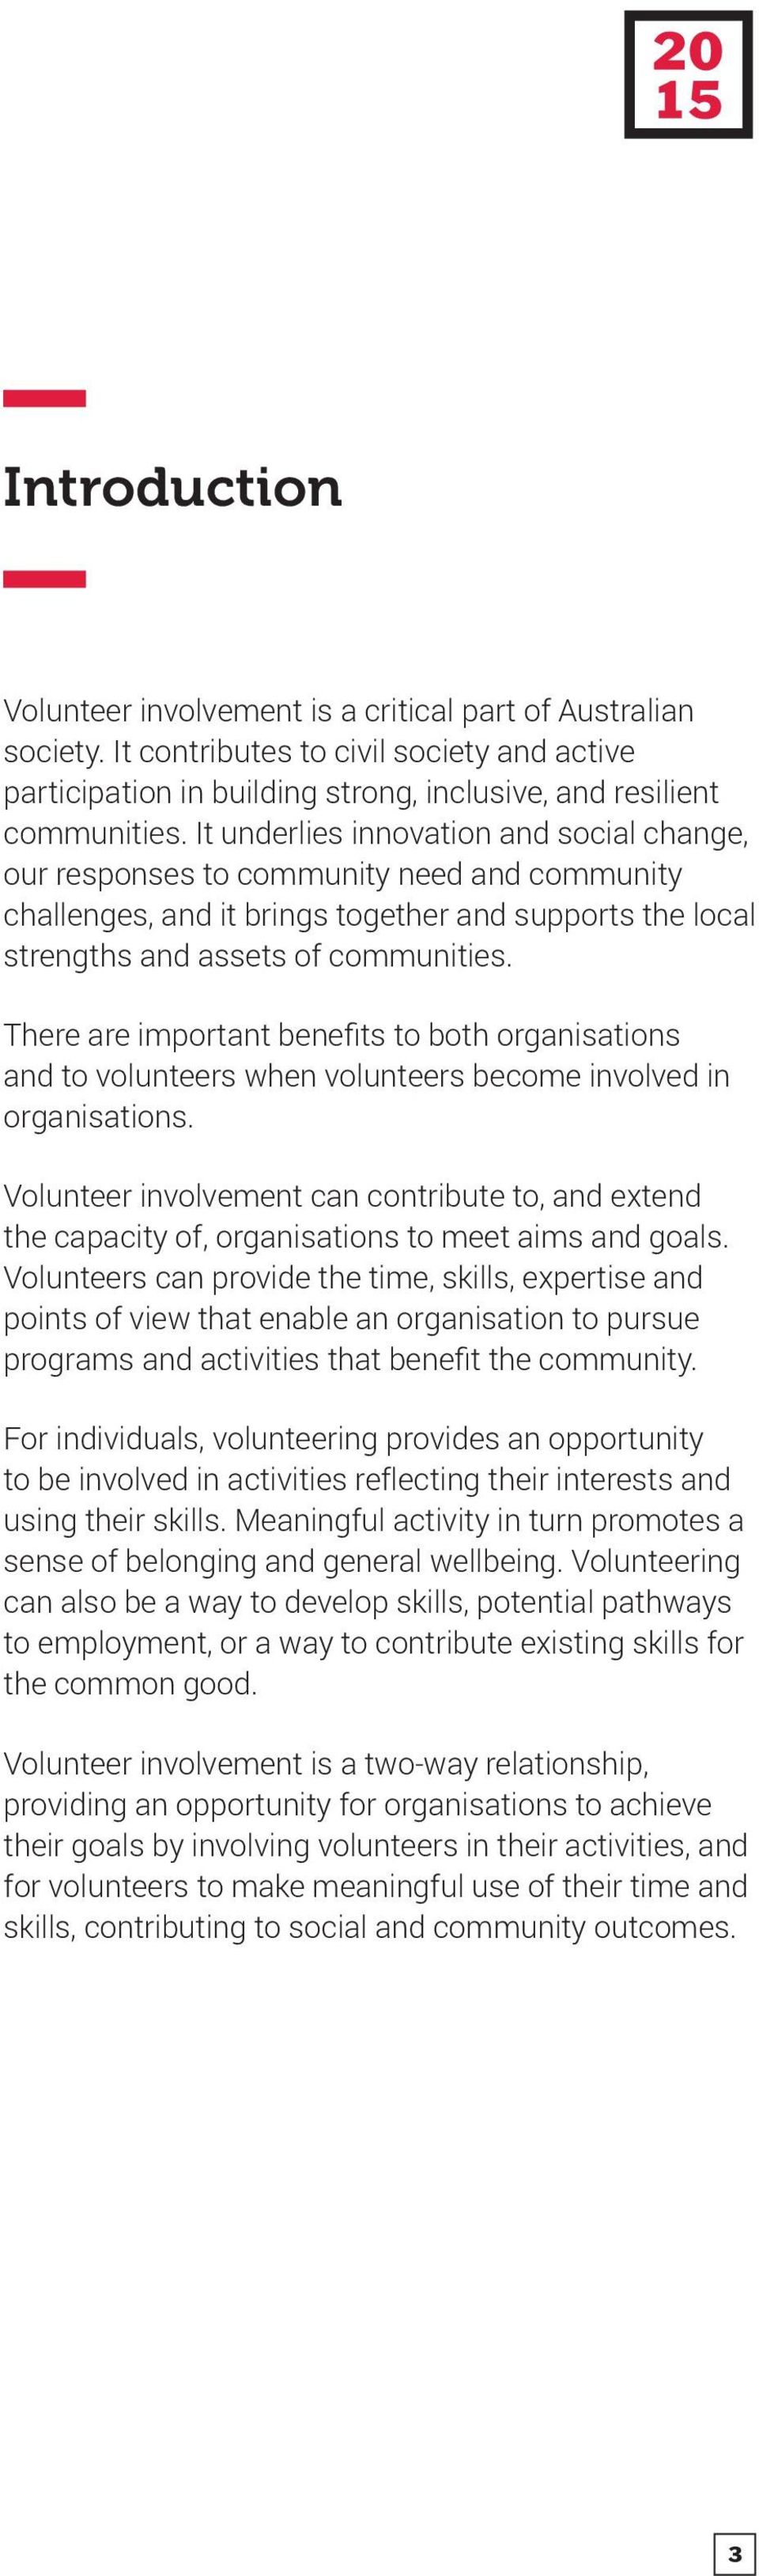 There are important benefits to both organisations and to volunteers when volunteers become involved in organisations.